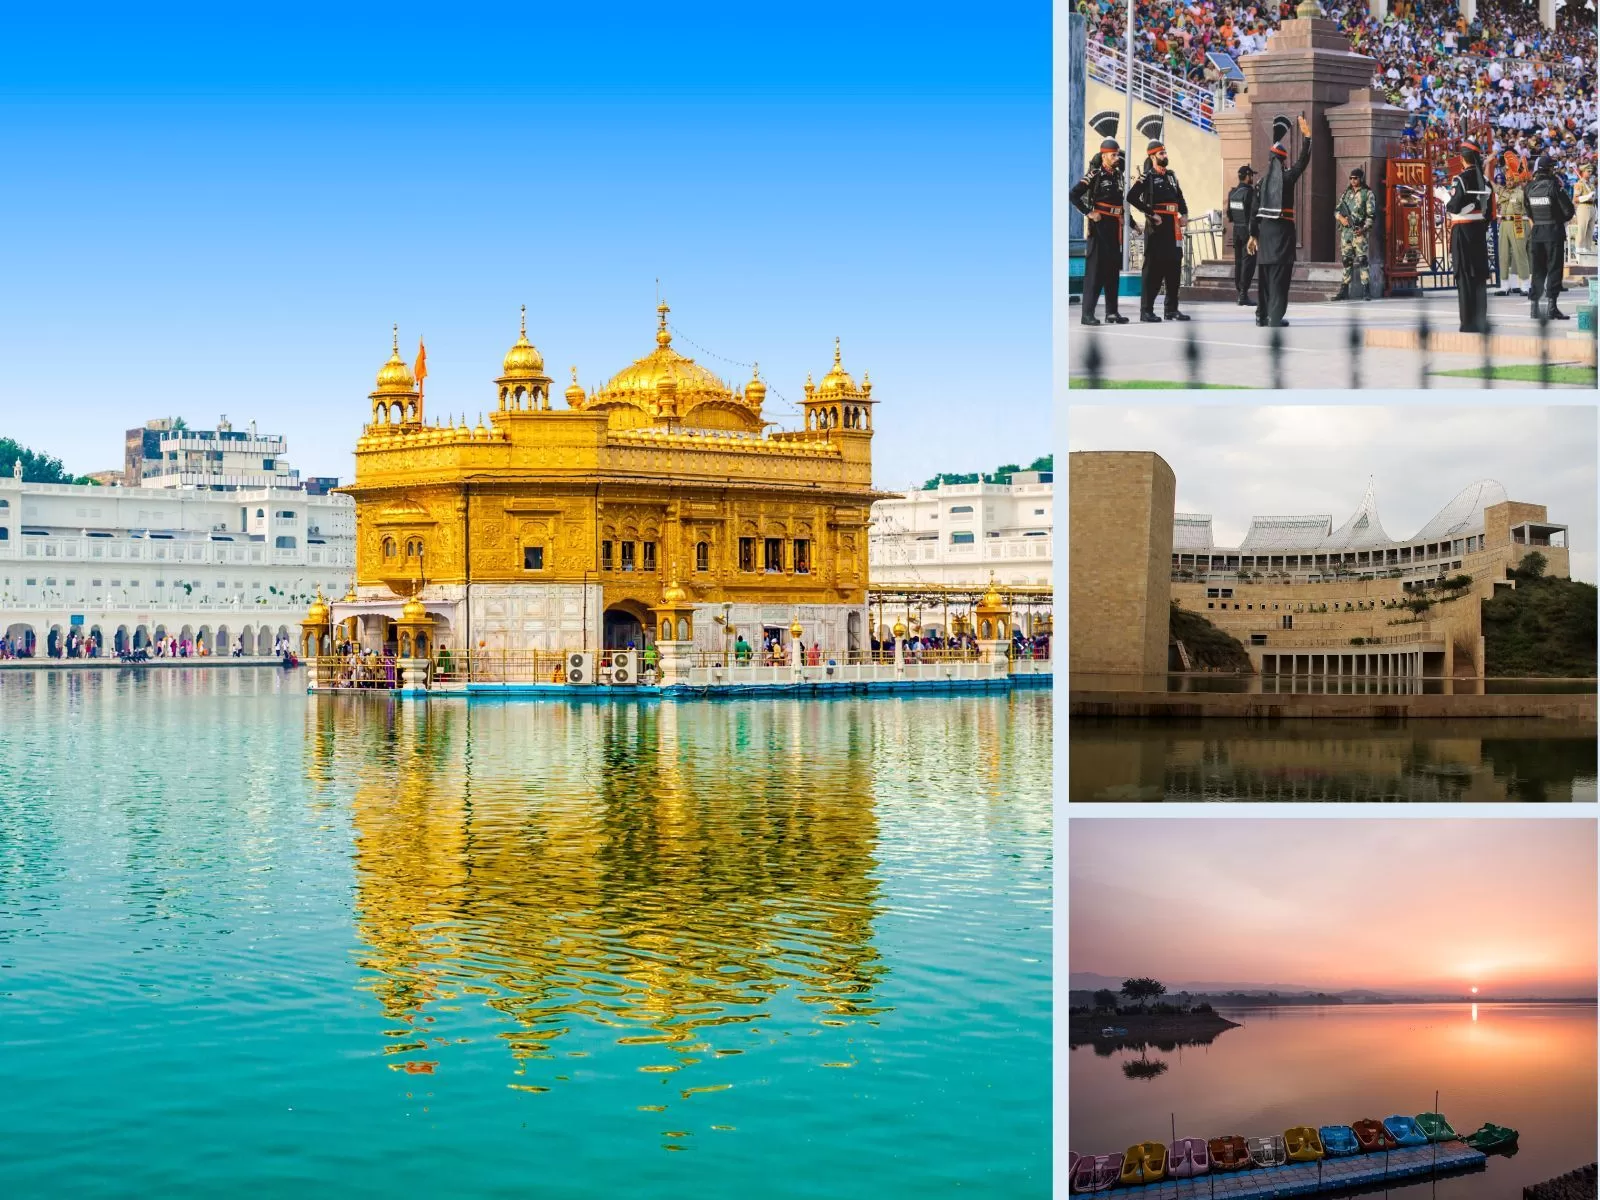 image of golden temple and other monuments